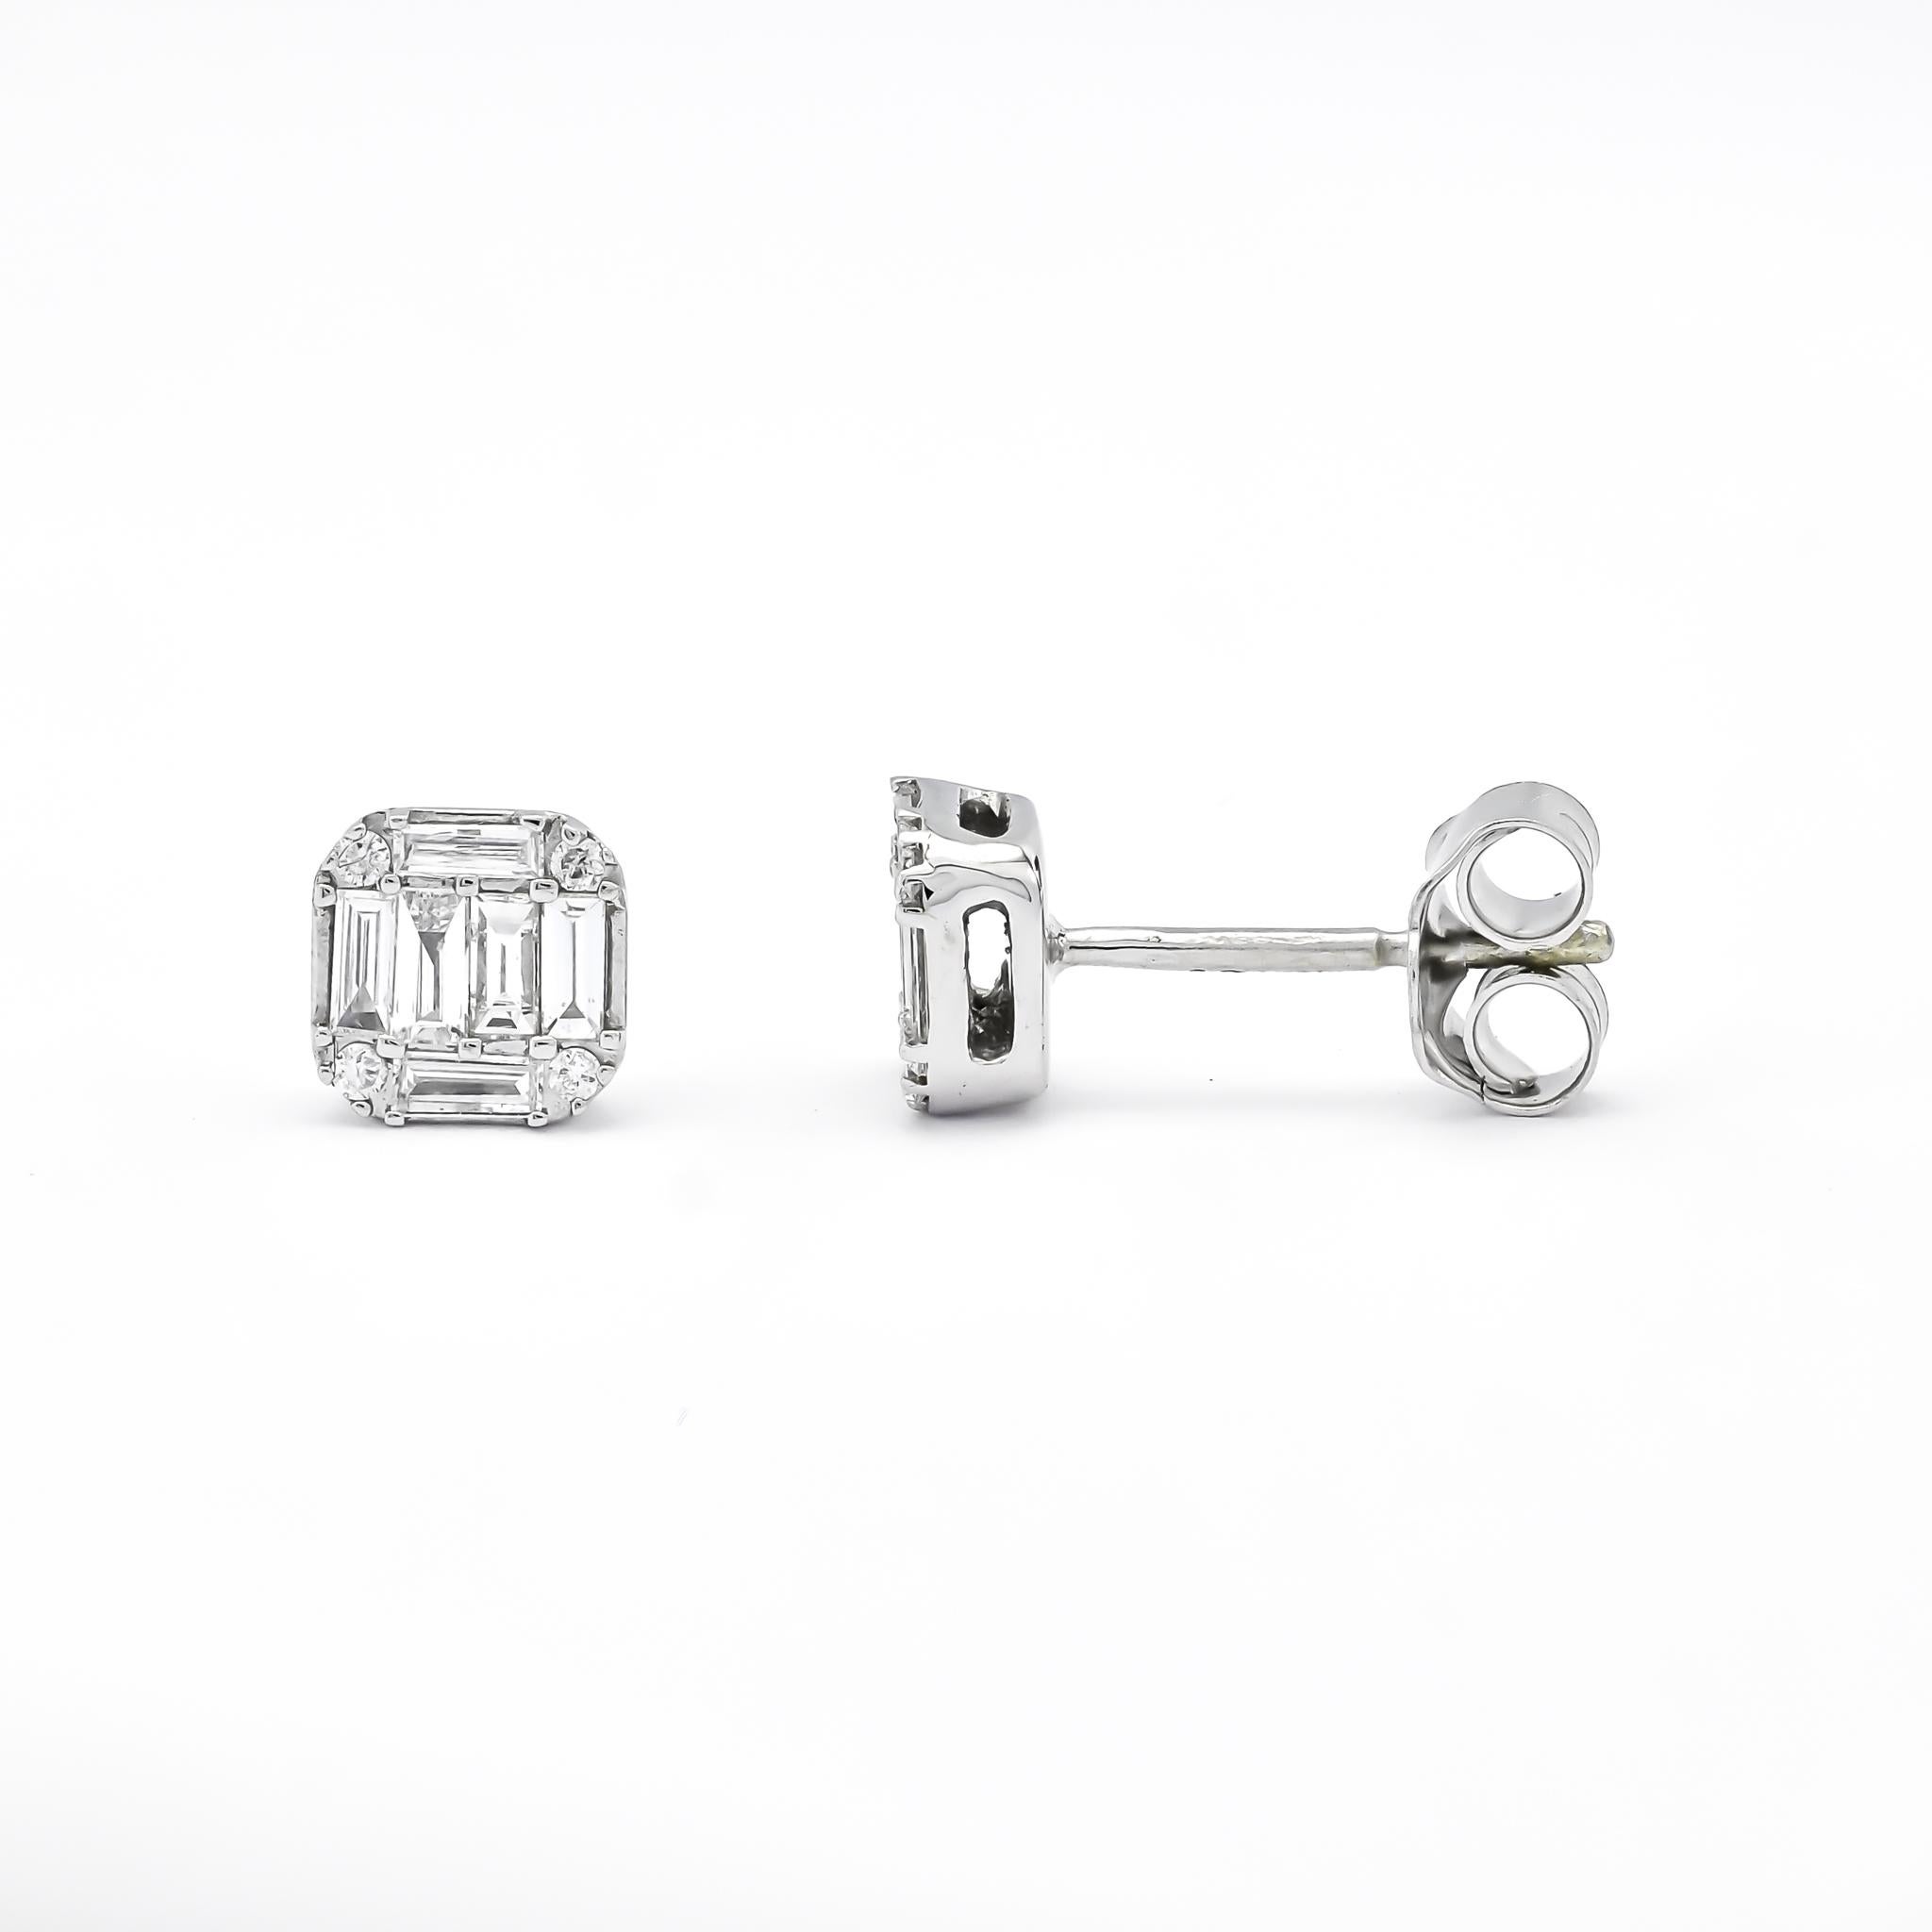  Natural Diamonds 0.25cts in 18KT White Gold Petite Stud Earrings E09332 In New Condition For Sale In Antwerpen, BE